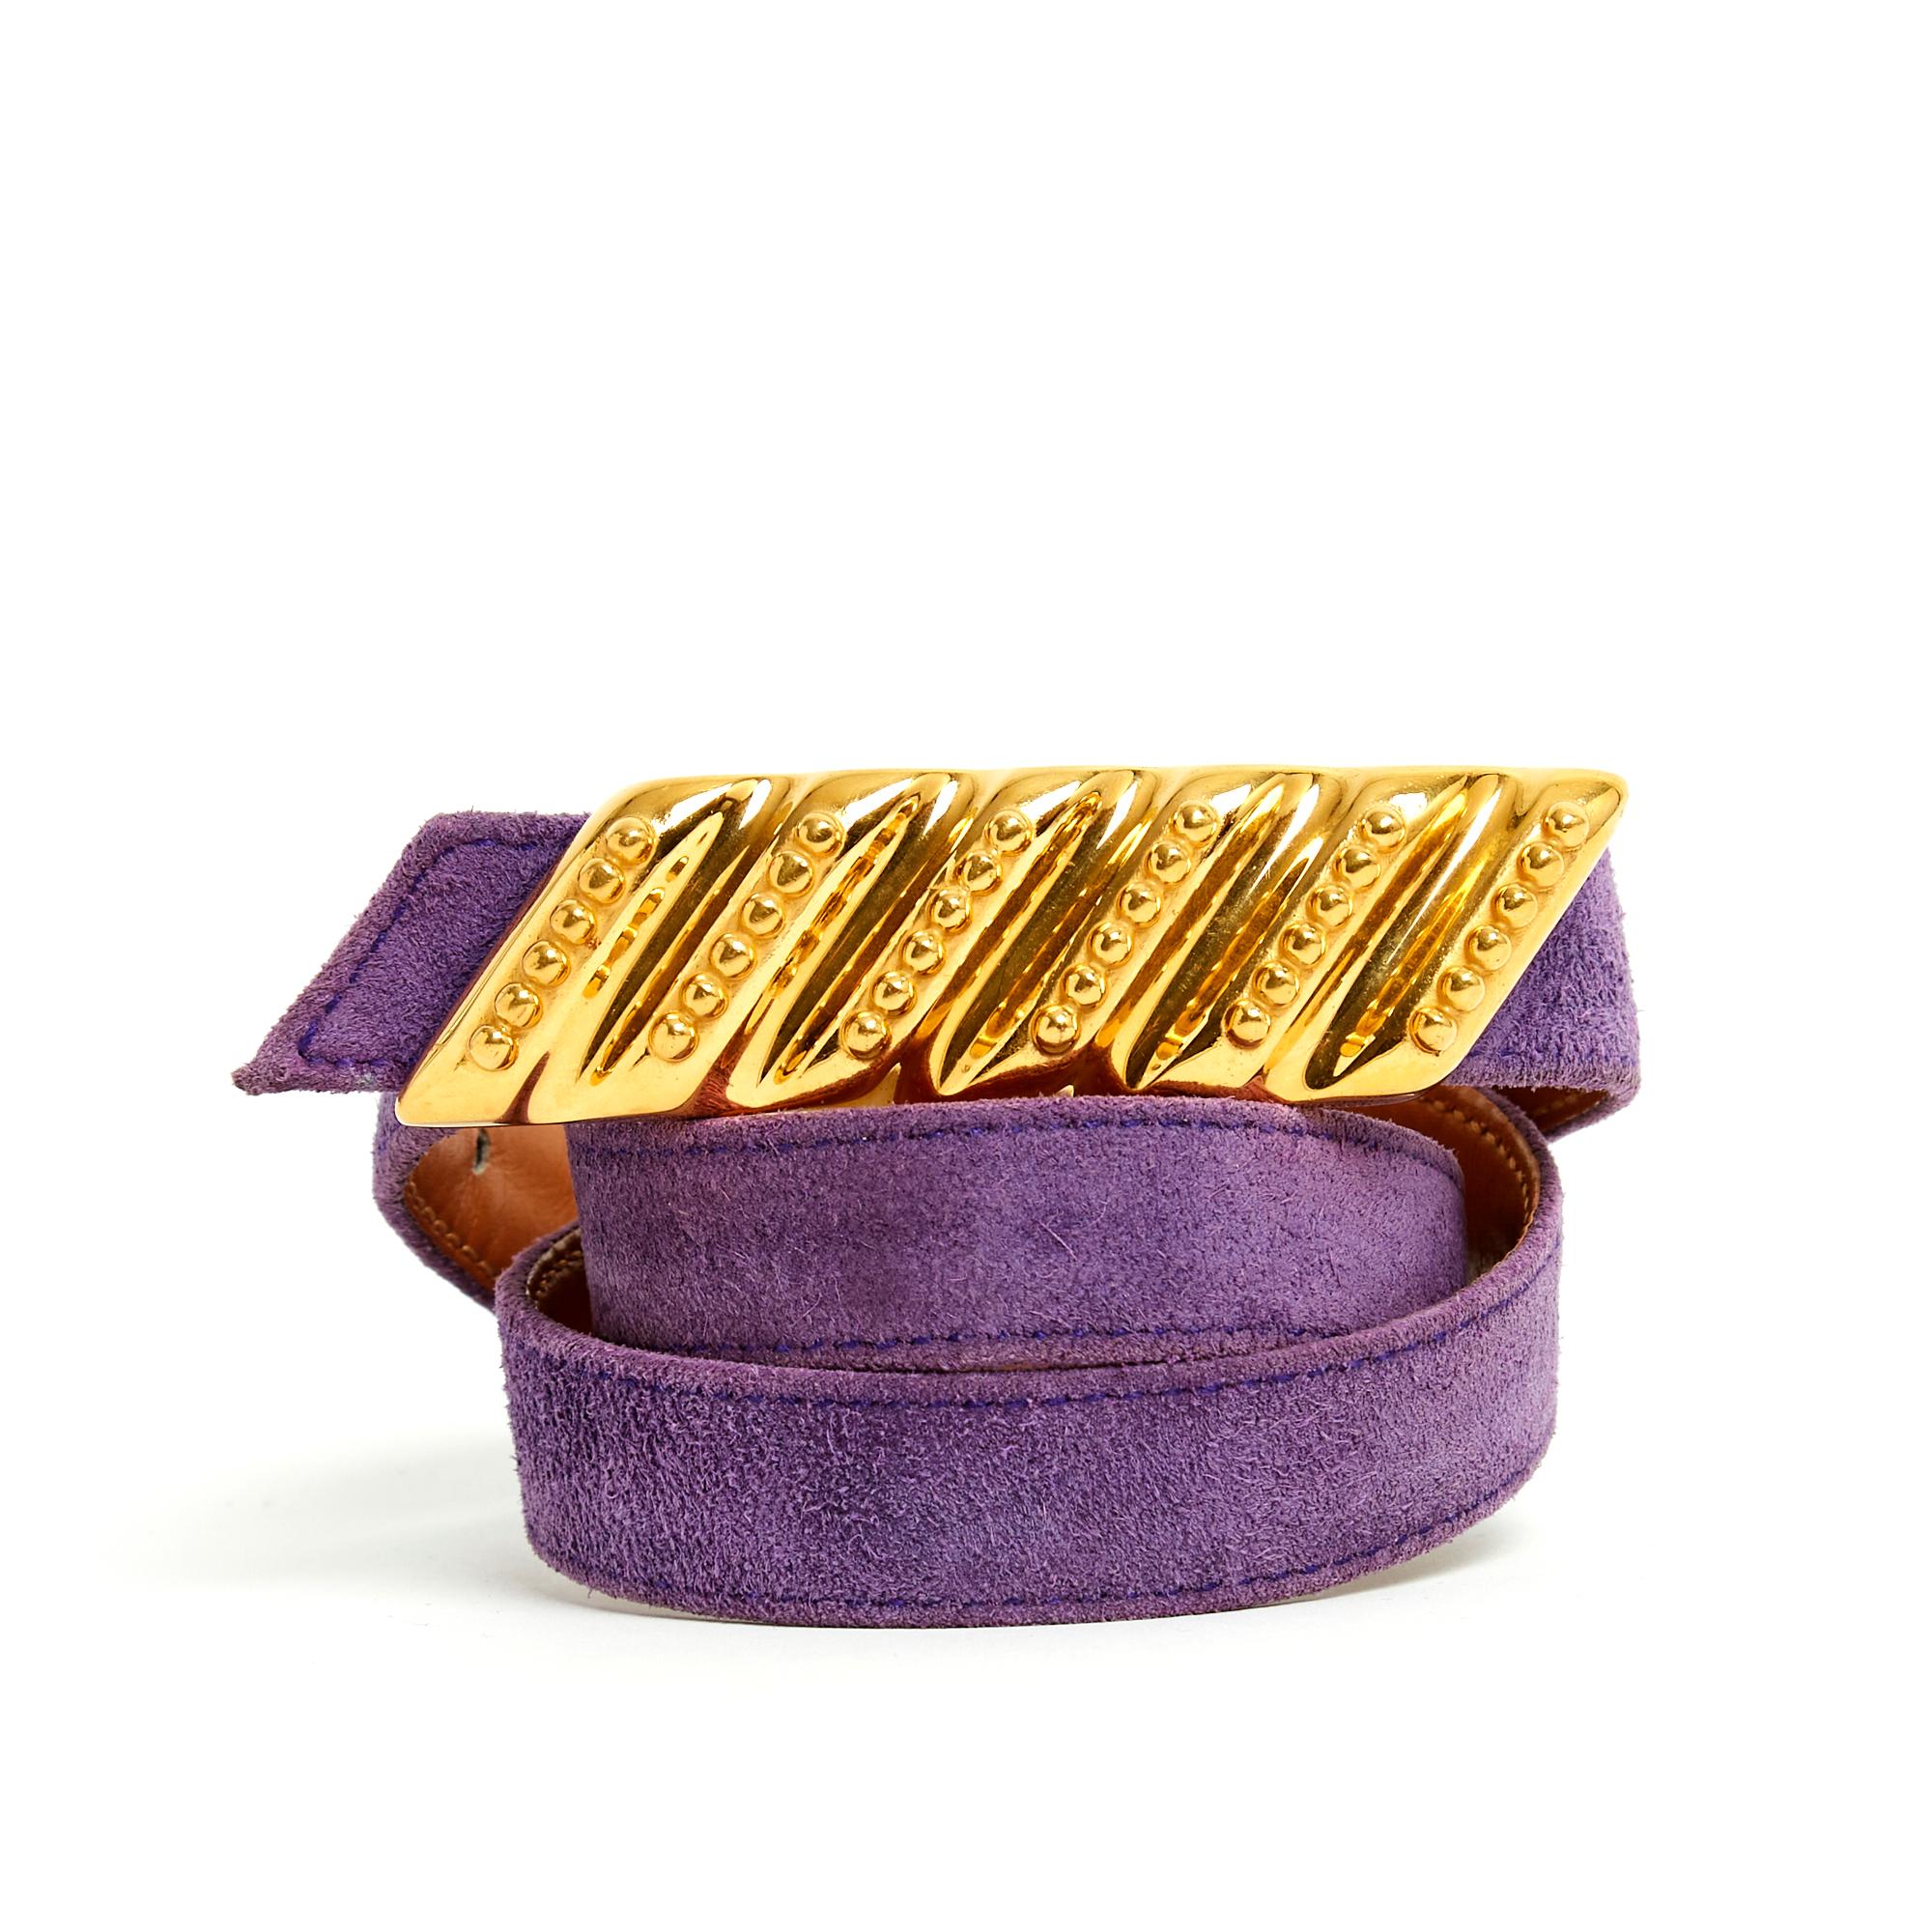 Hermès A Composer series belt including a reversible link in purple suede and camel or gold-colored box leather and a gold metal buckle with a gadroon pattern topped with micro pearls. Size 70 cm, total length 82 cm, closure from 66 to 77 cm on 5